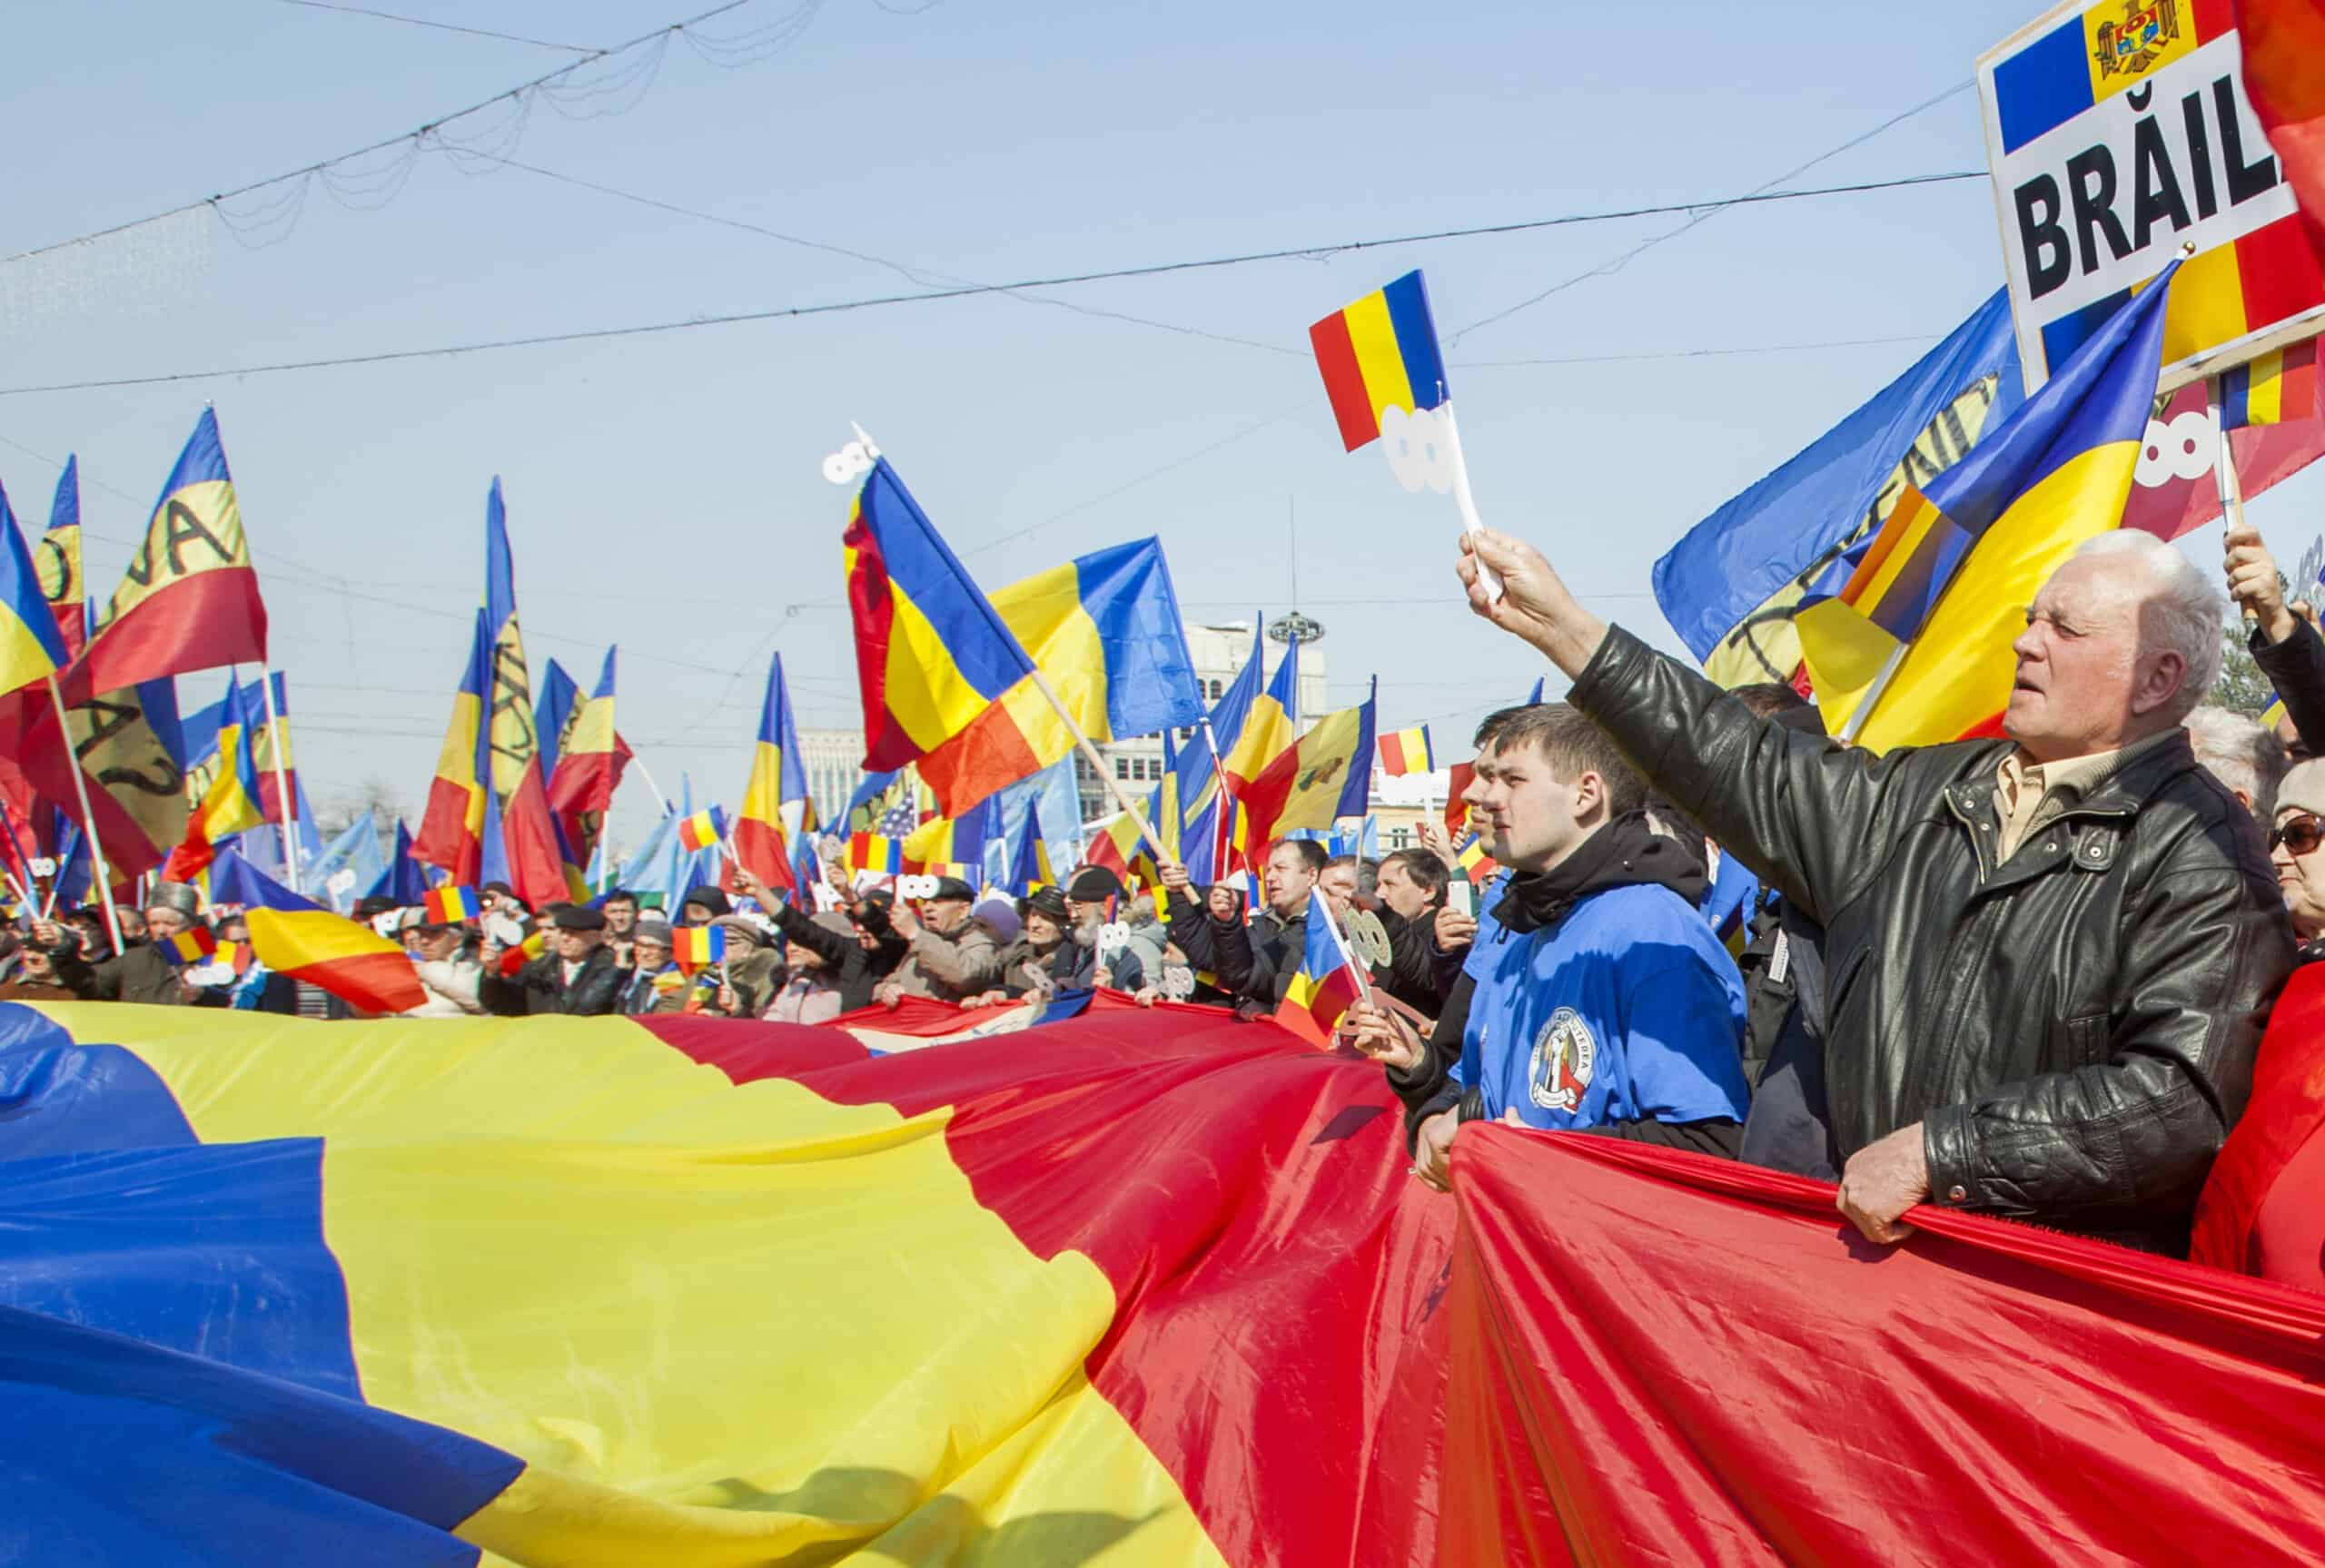 The future of Romania in Europe, its relations with Moldova and the continental chessboard with Russia